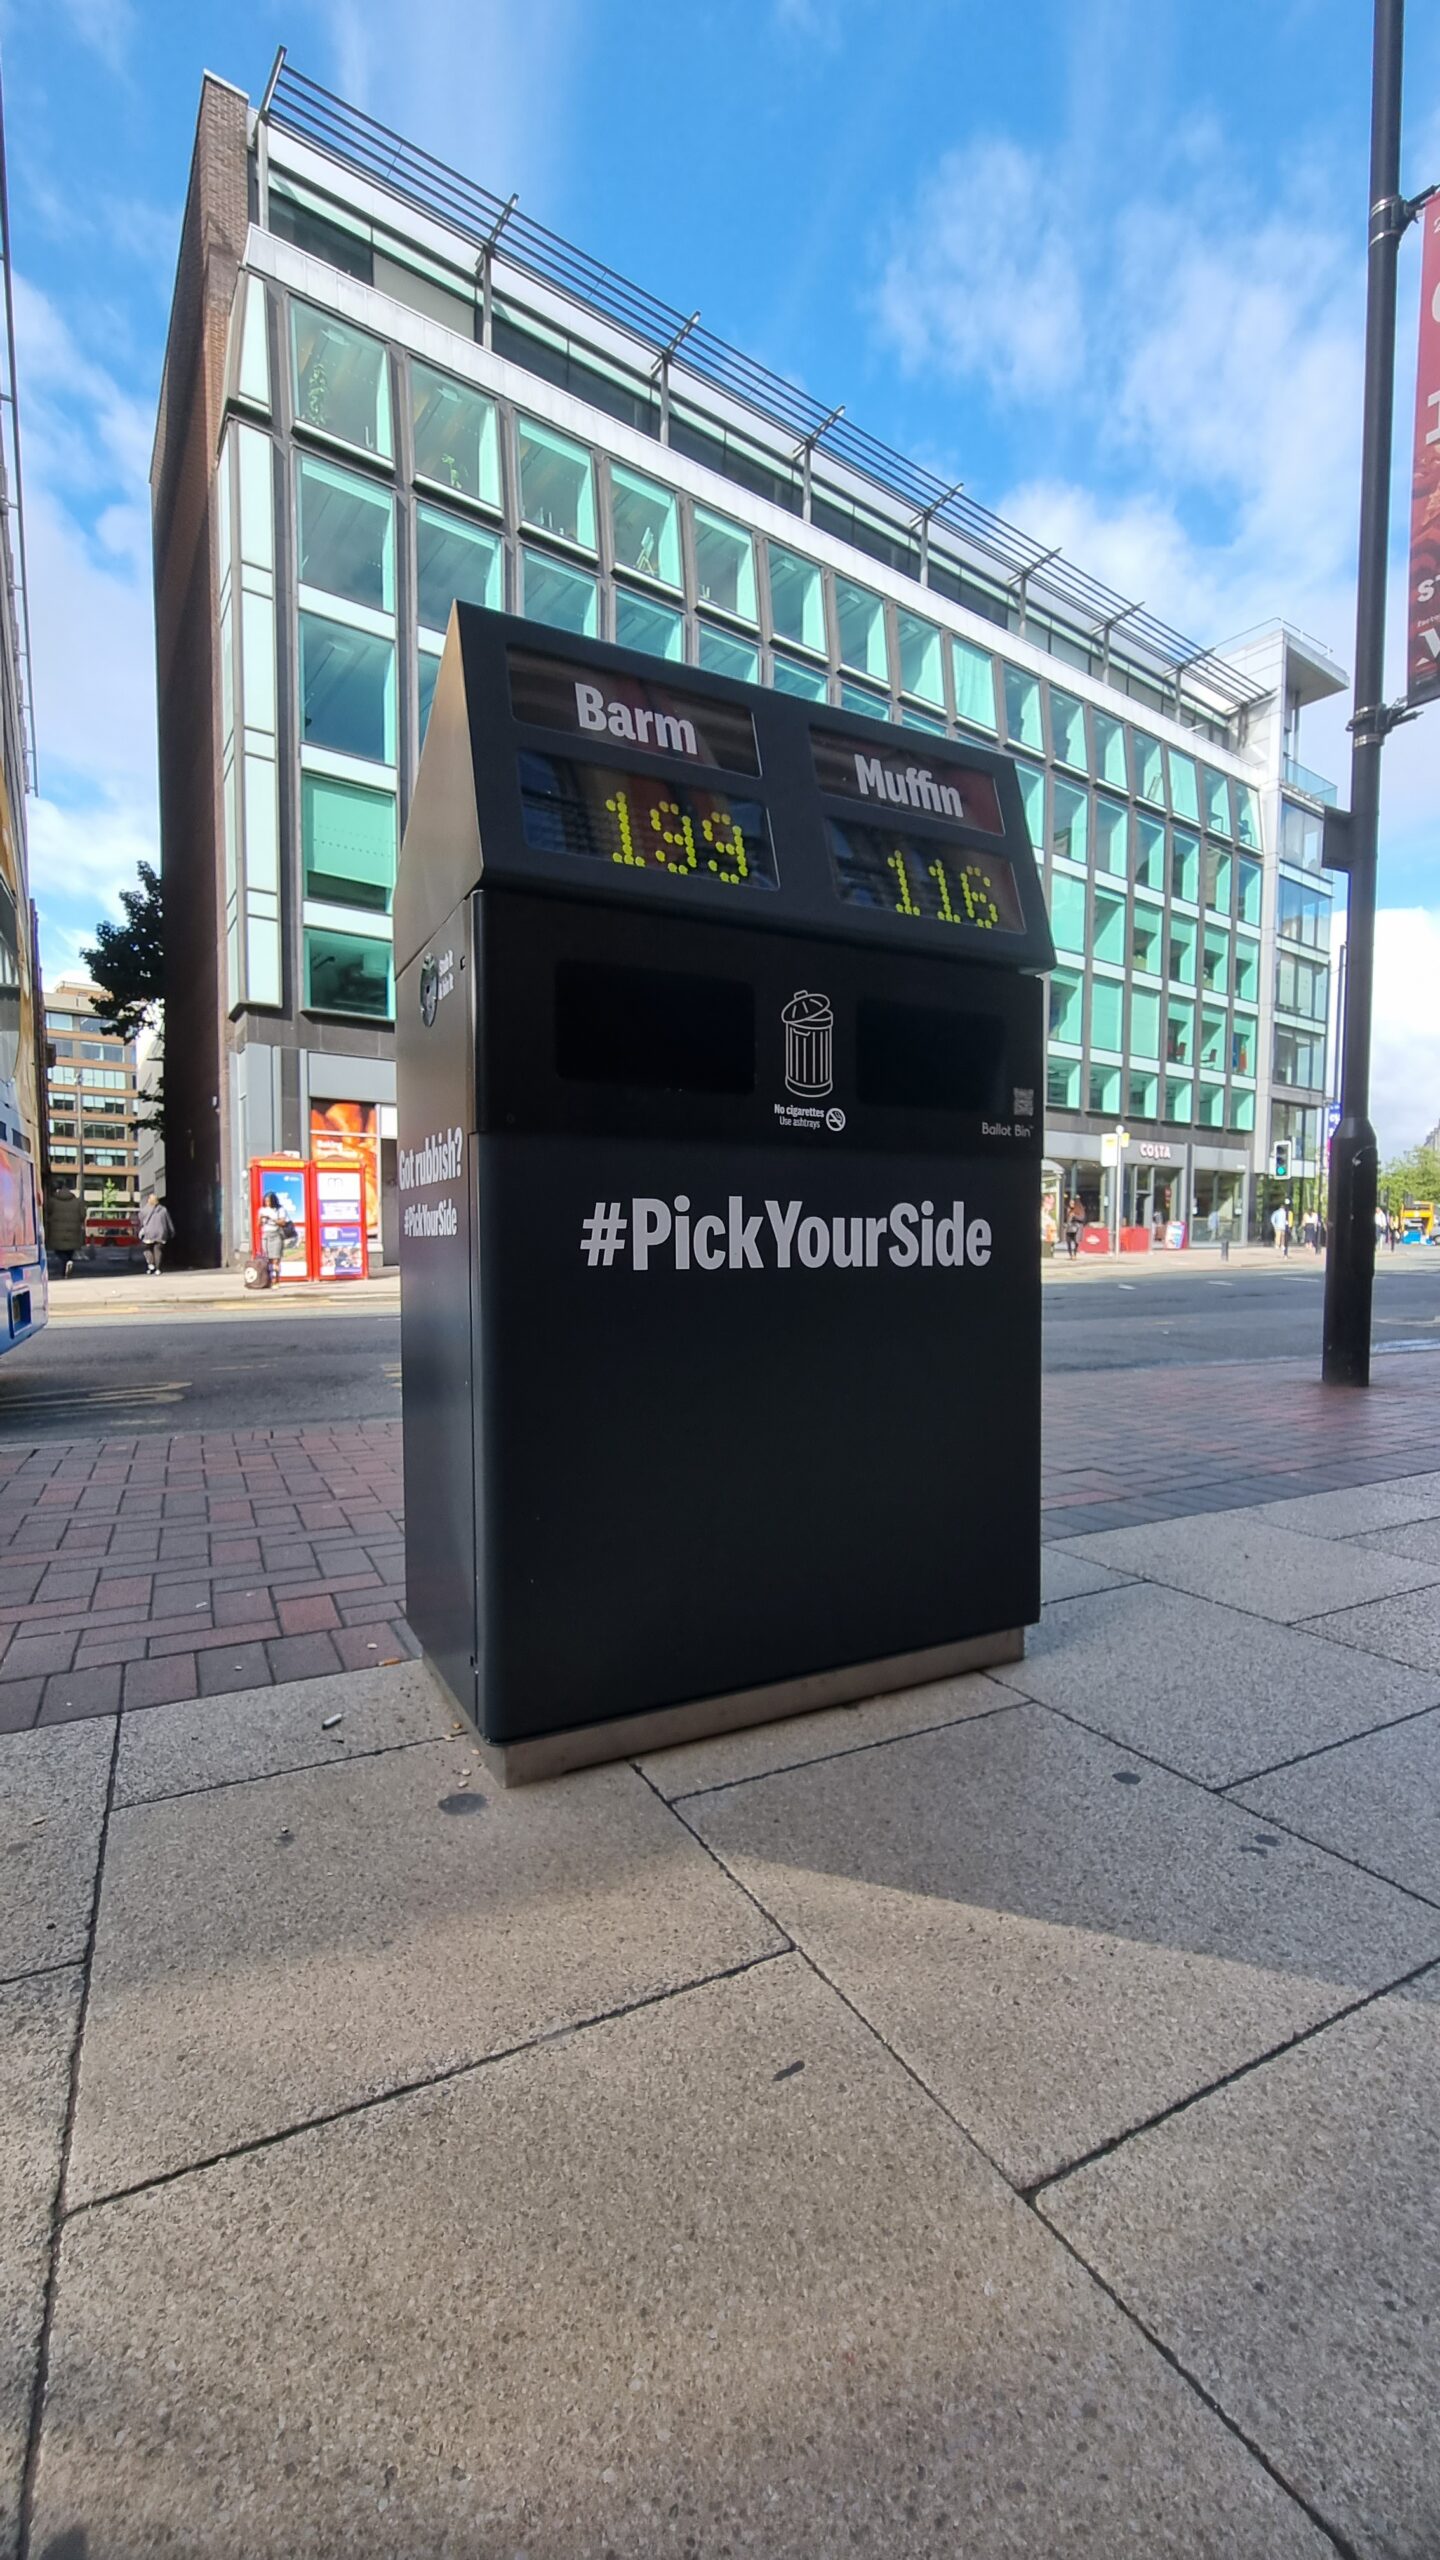 New 'ballot bins' have appeared in Manchester city centre